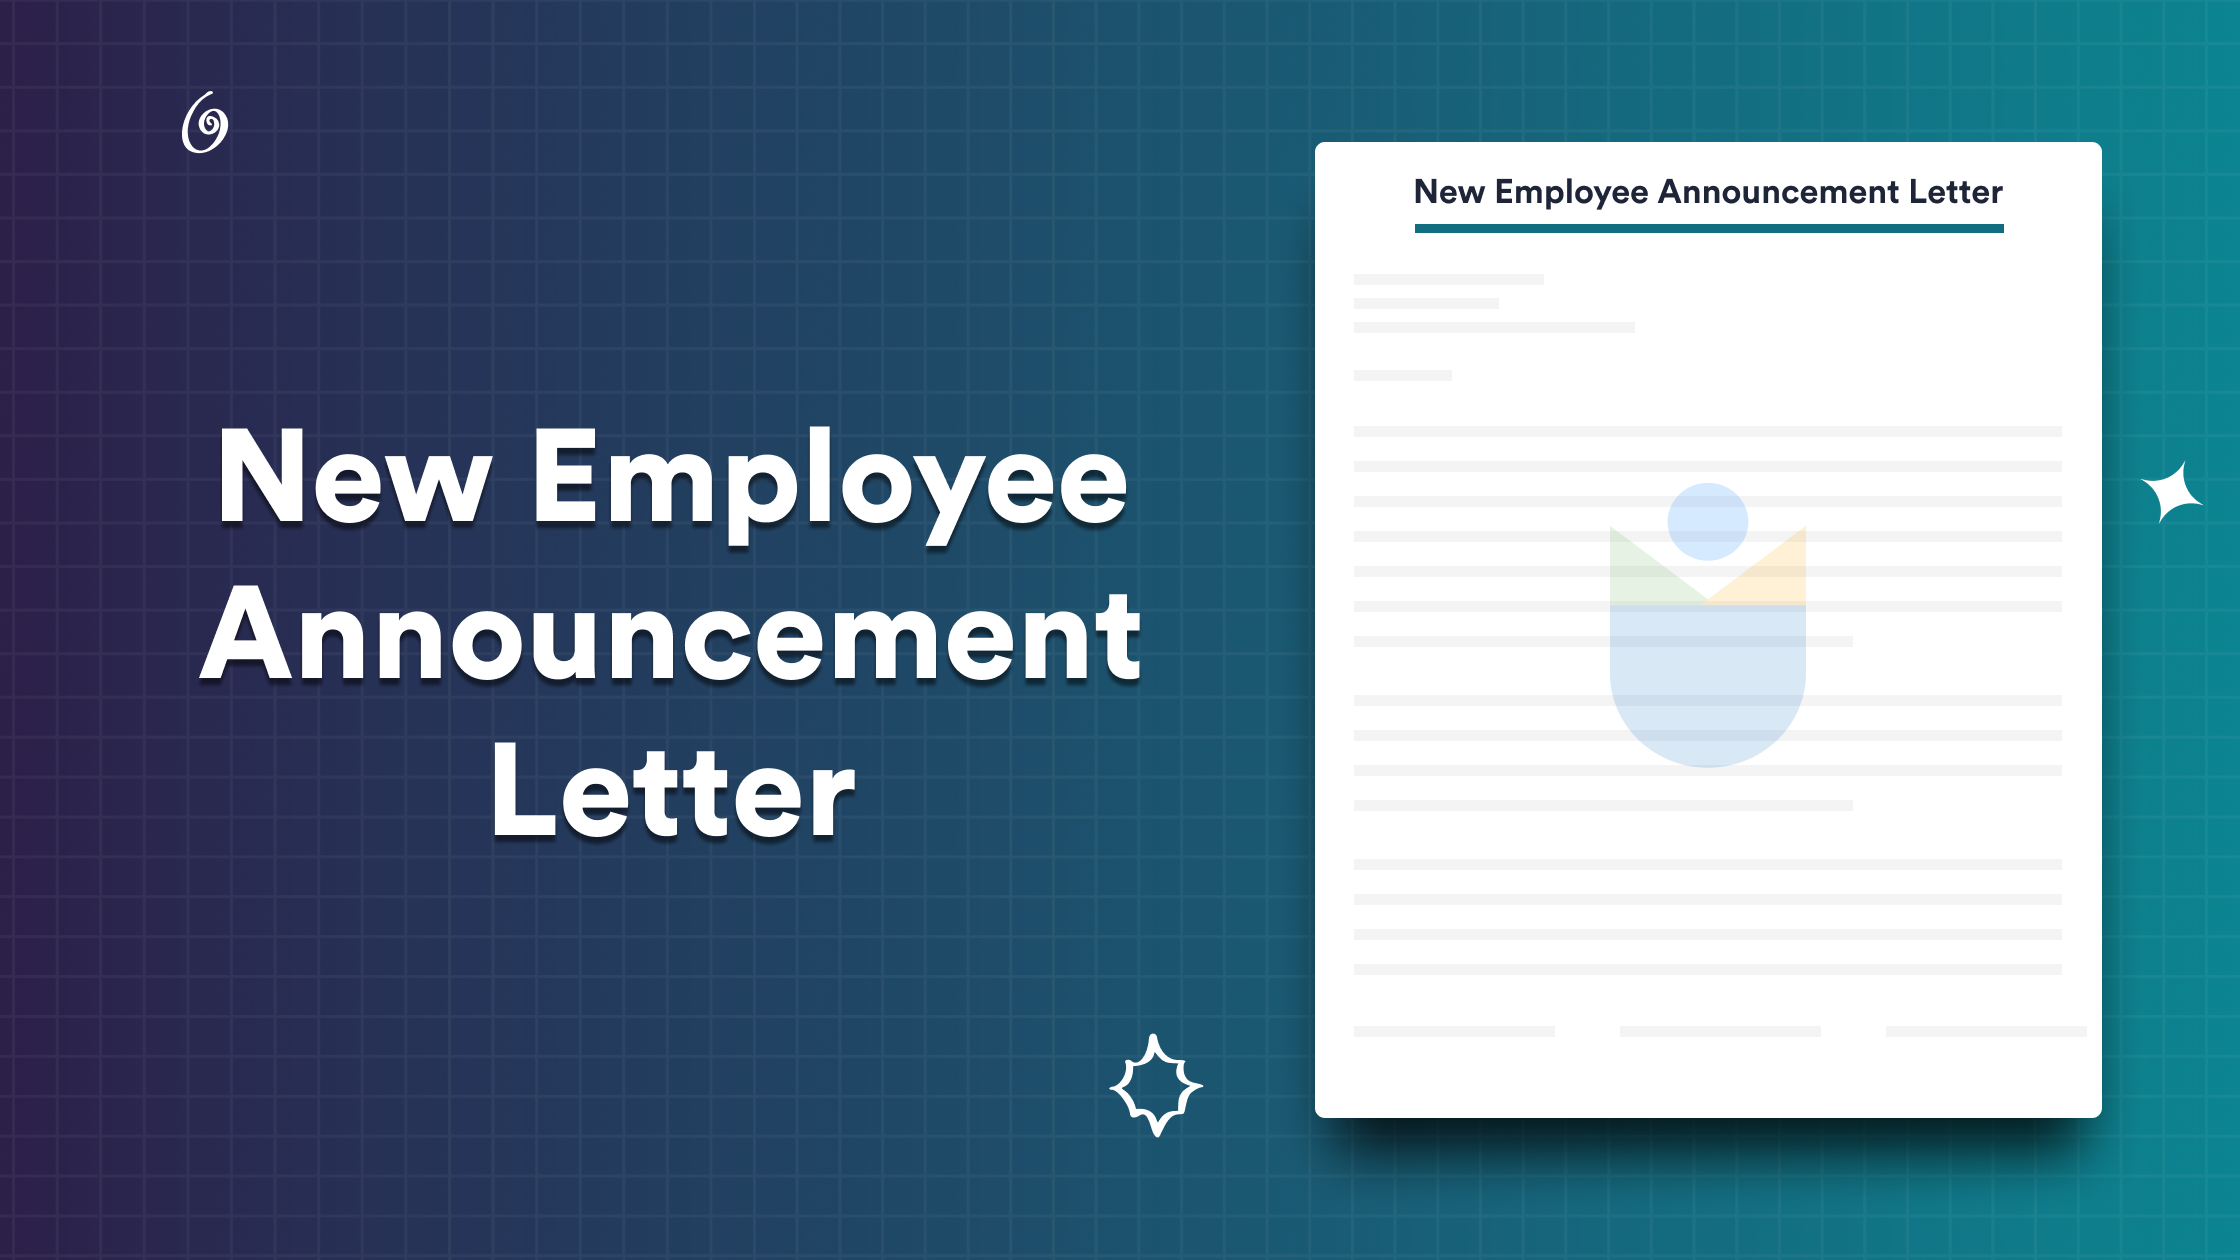 New Employee Announcement Letter Learn How to Write